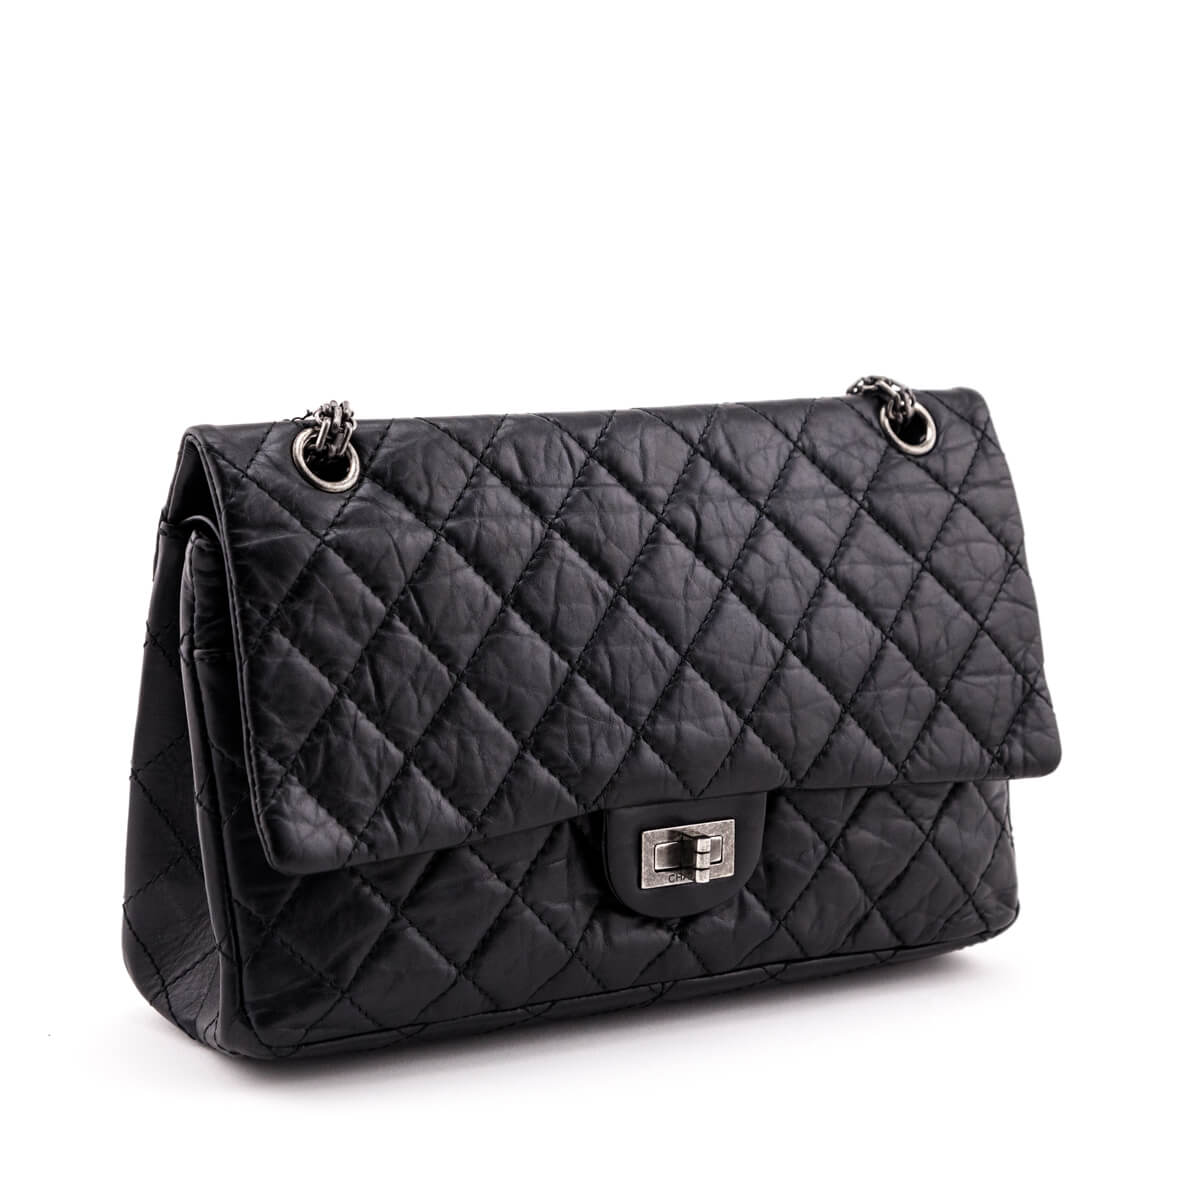 Chanel Black Quilted Aged Calfskin 2.55 Reissue 226 Flap Bag